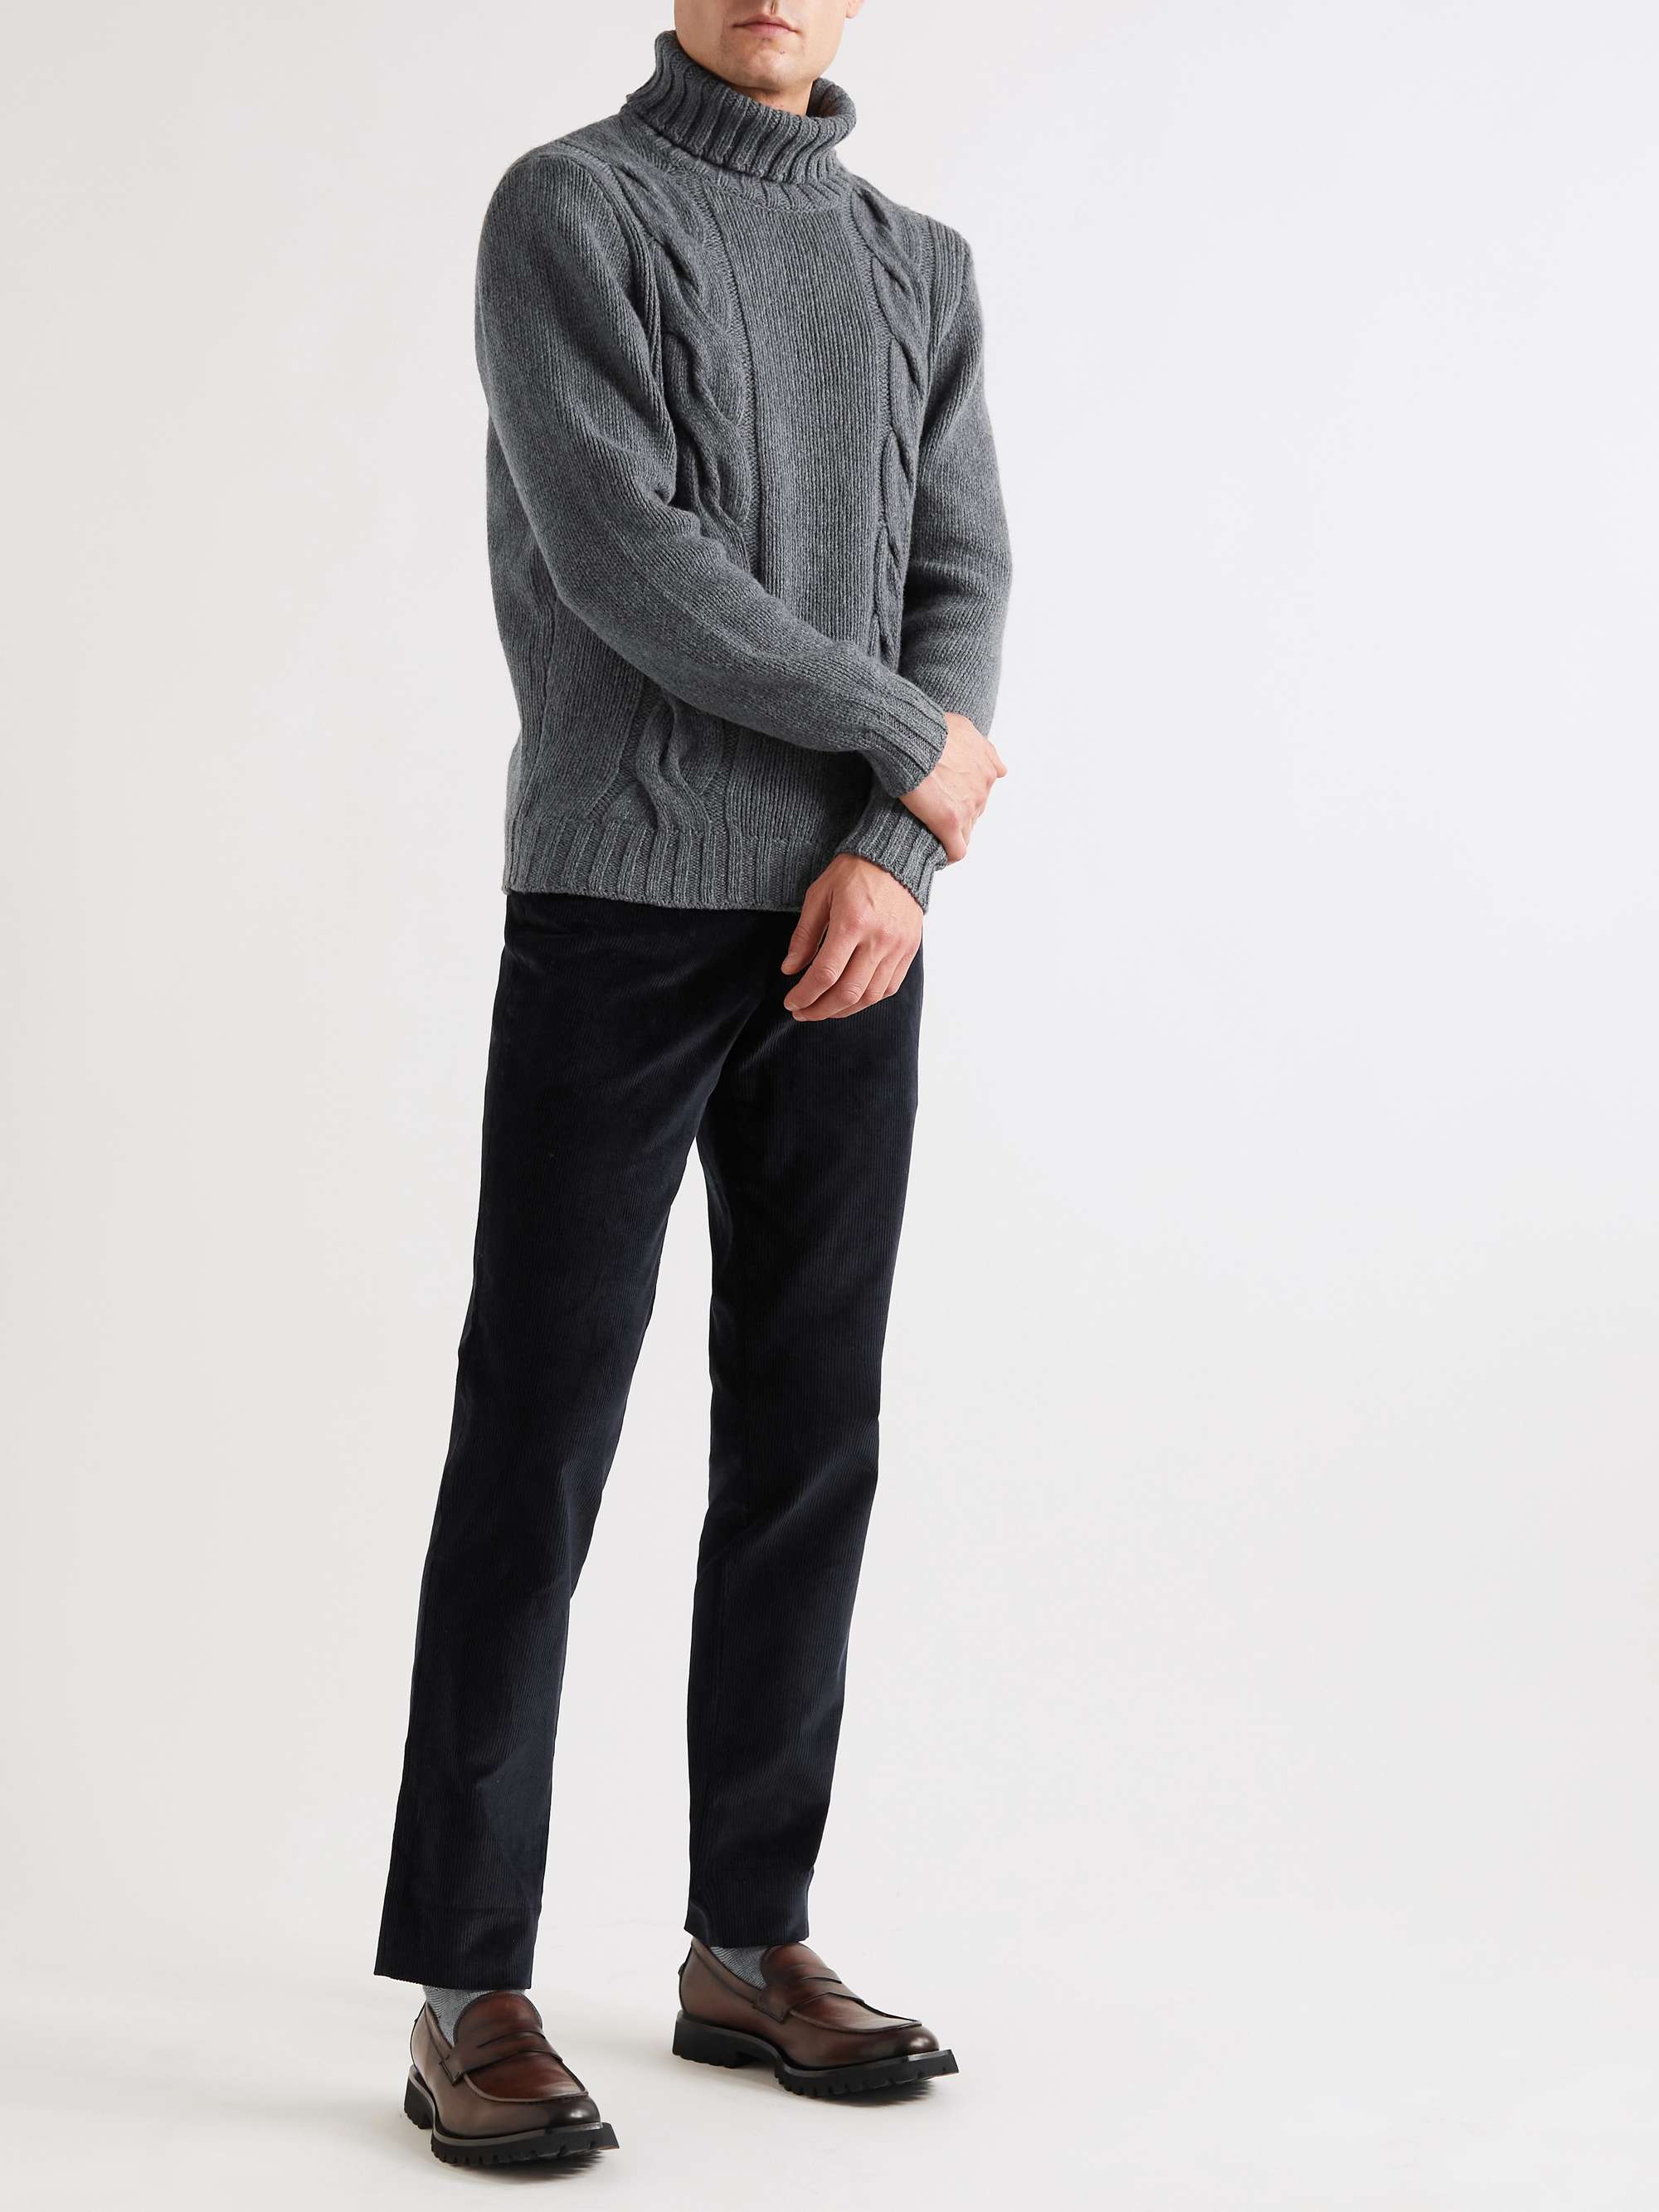 ANDERSON & SHEPPARD Slim-Fit Cable-Knit Merino Wool Rollneck Sweater